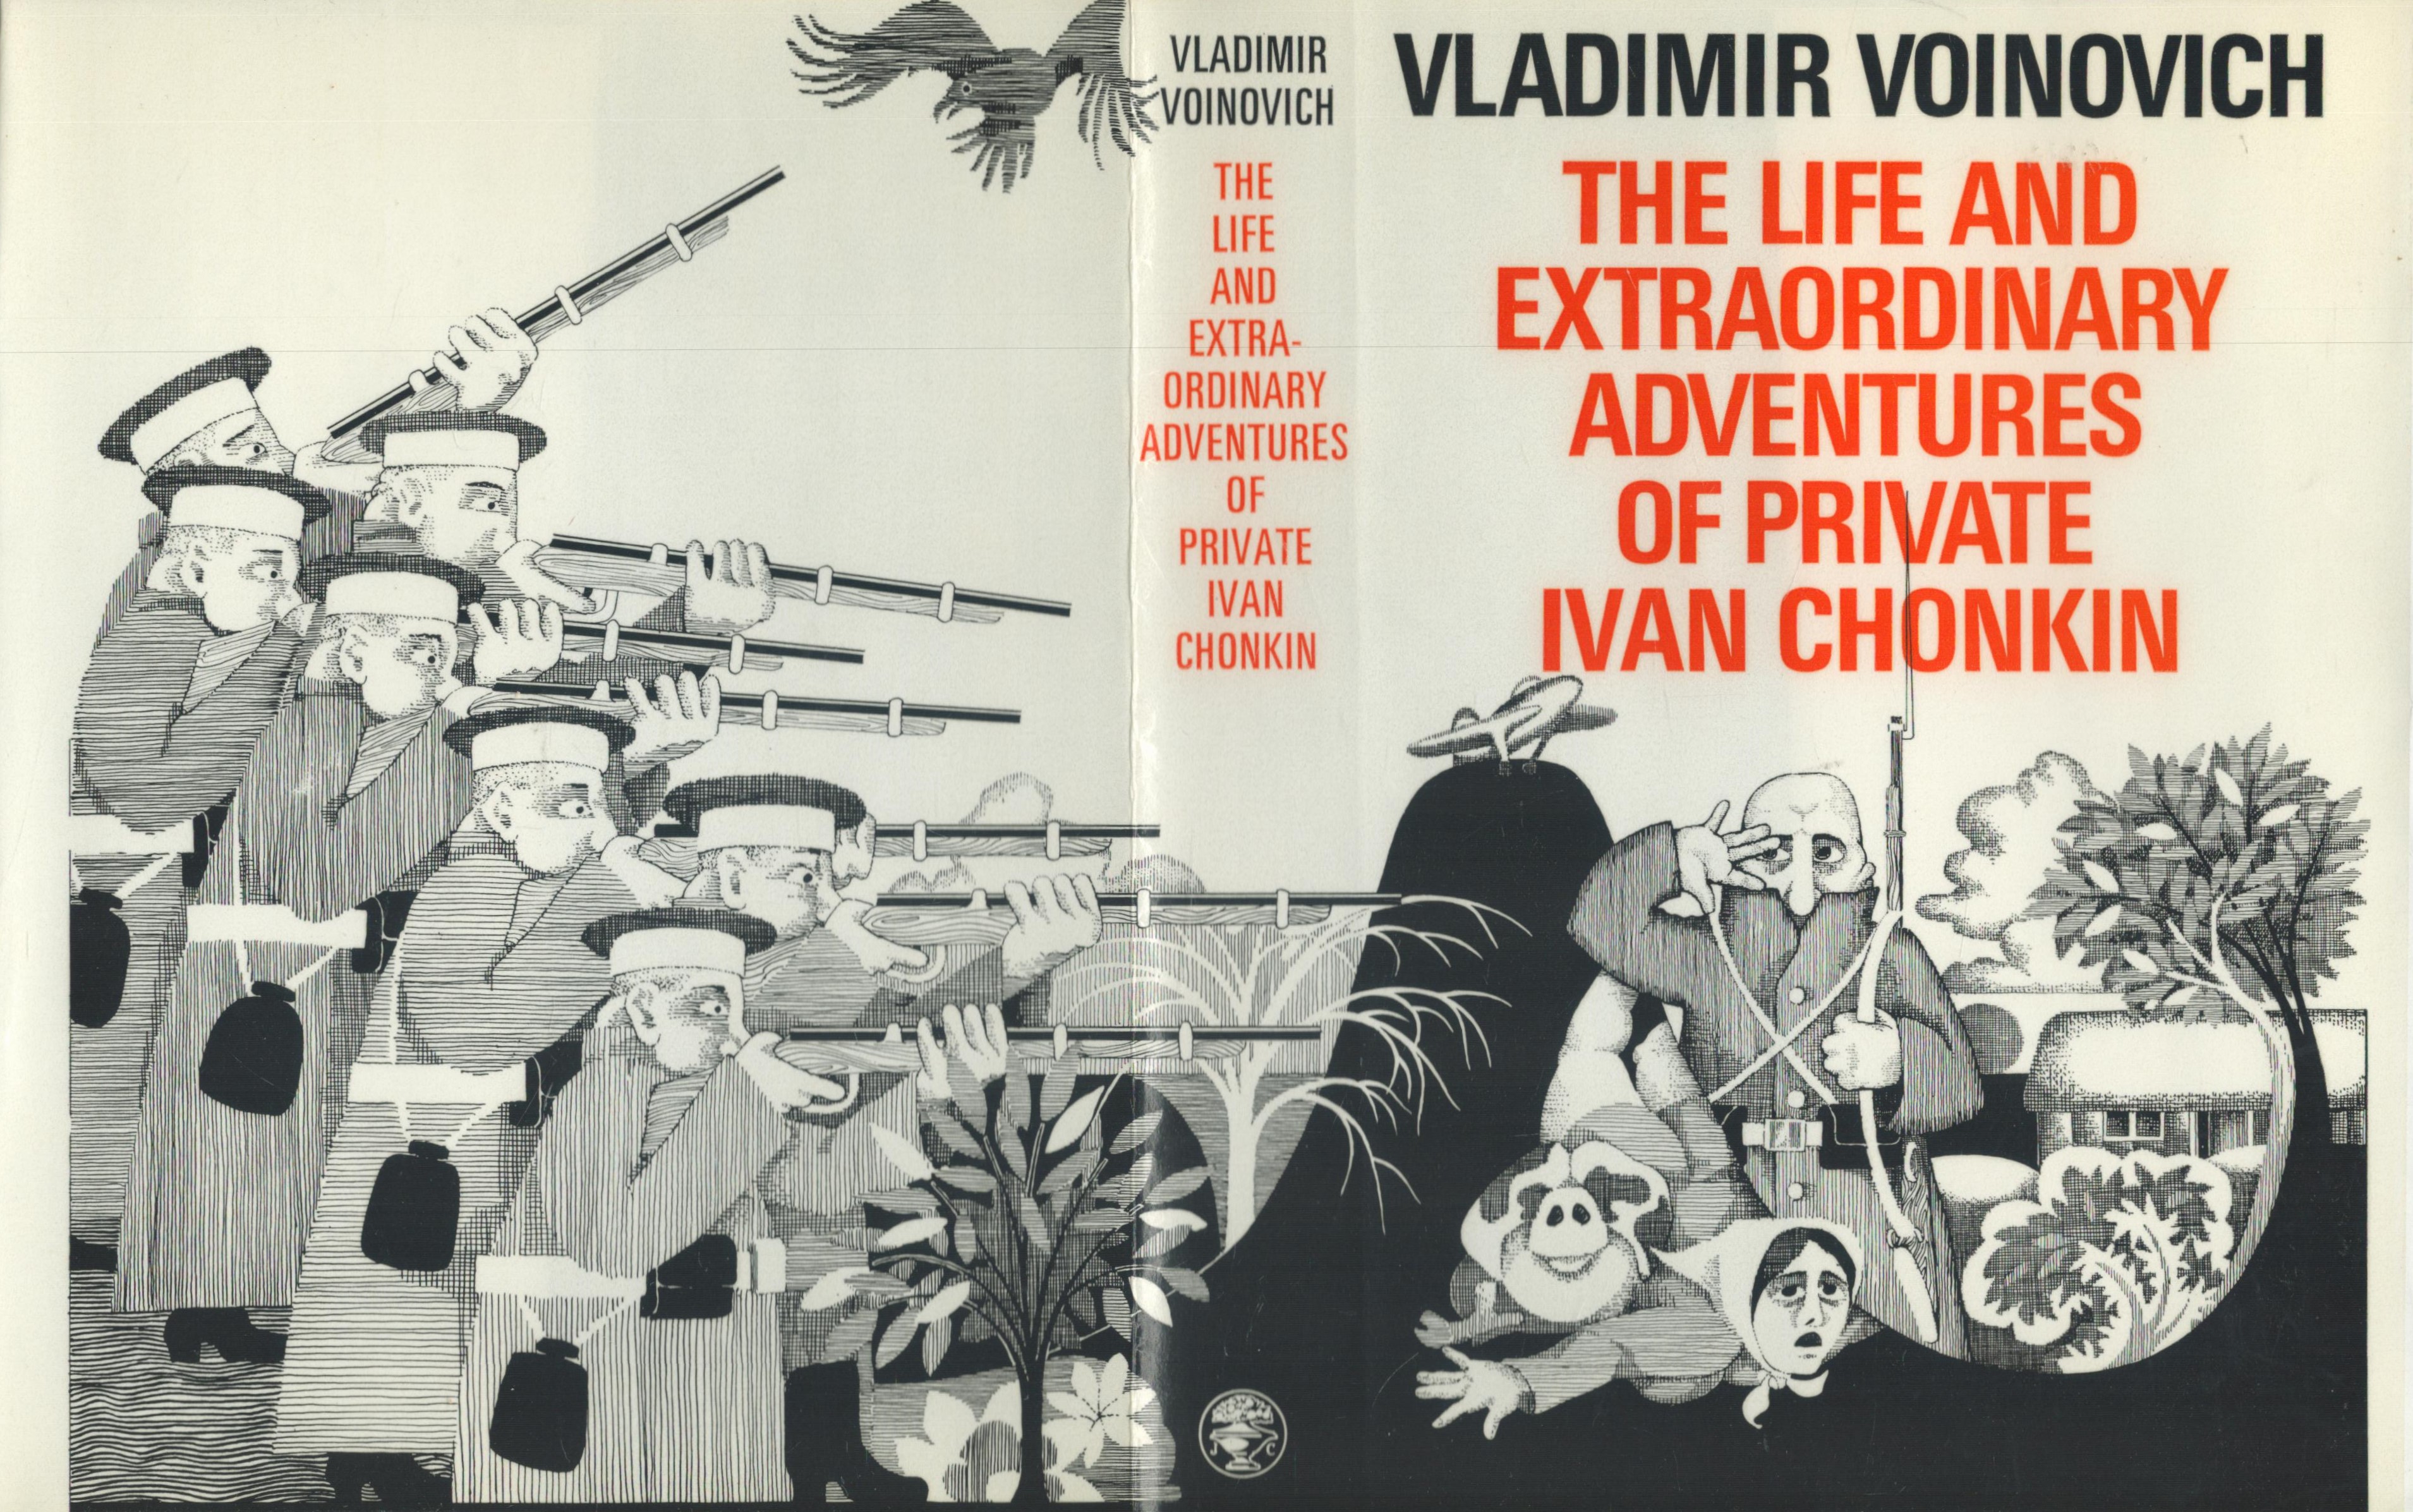 Vladimir Voinovich The Life and Extraordinary Adventures of Private Ivan Chonkin Publisher